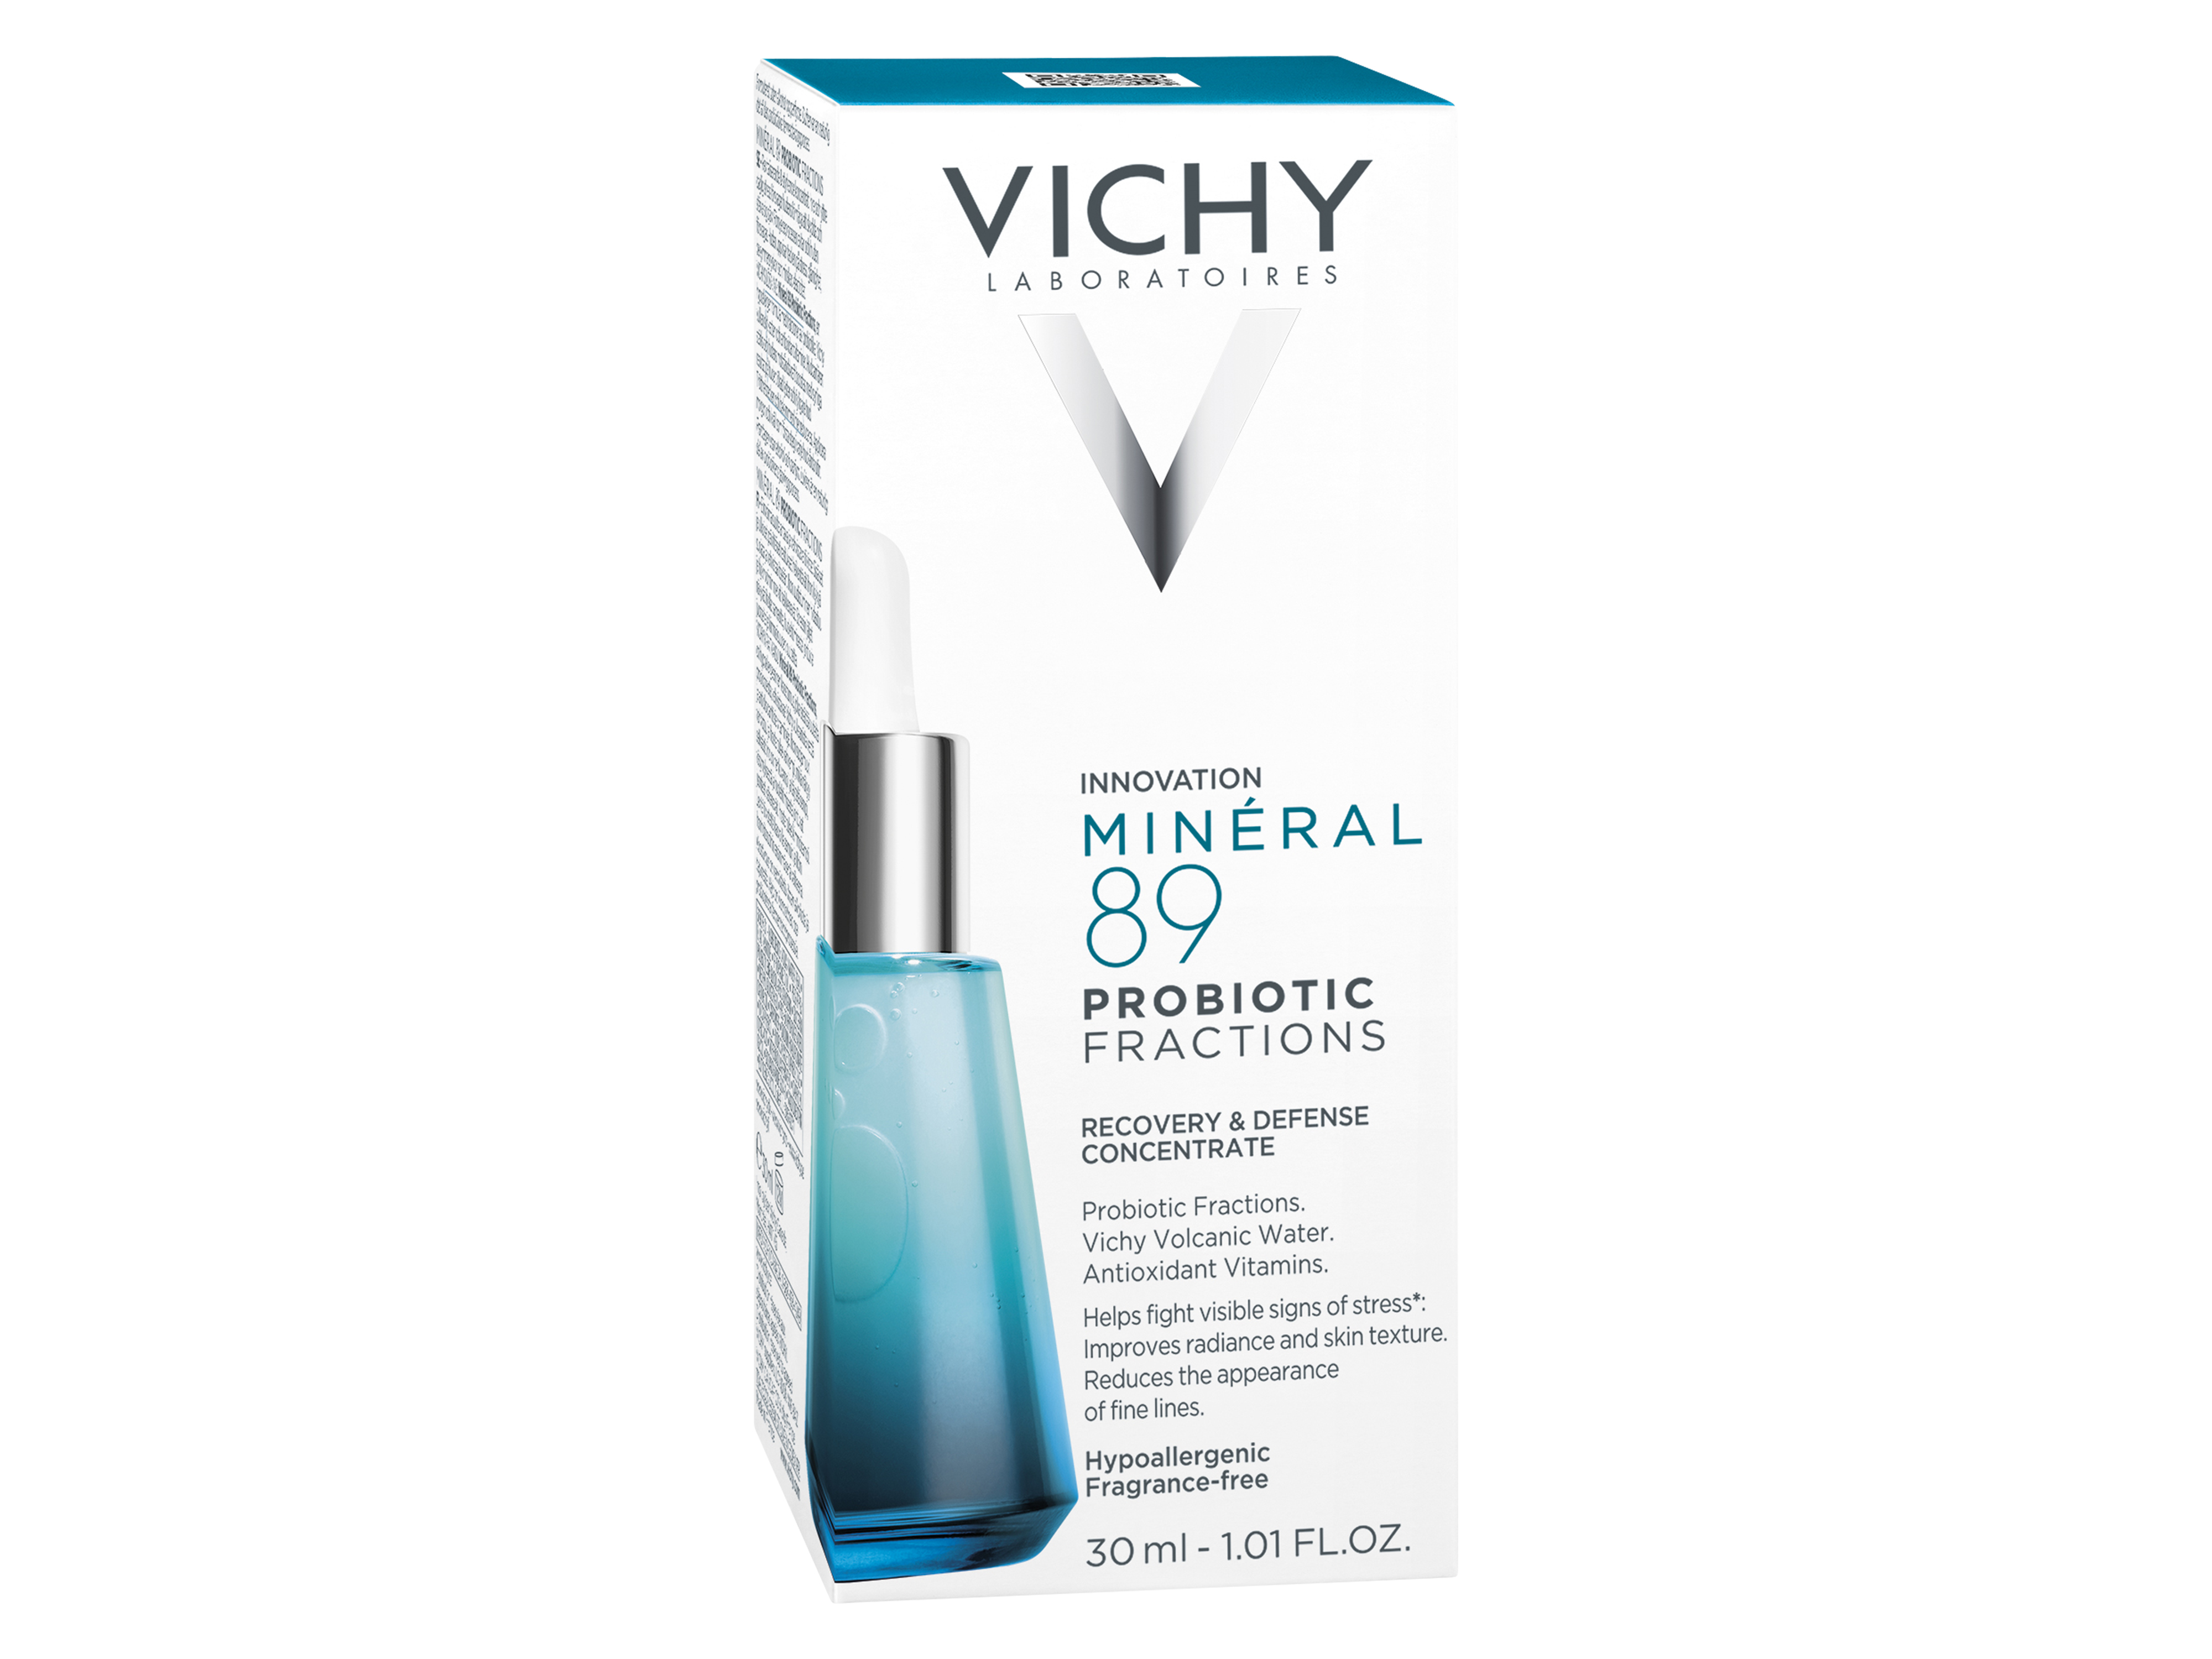 Vichy Mineral 89 Probiotic Concentrate, 30 ml